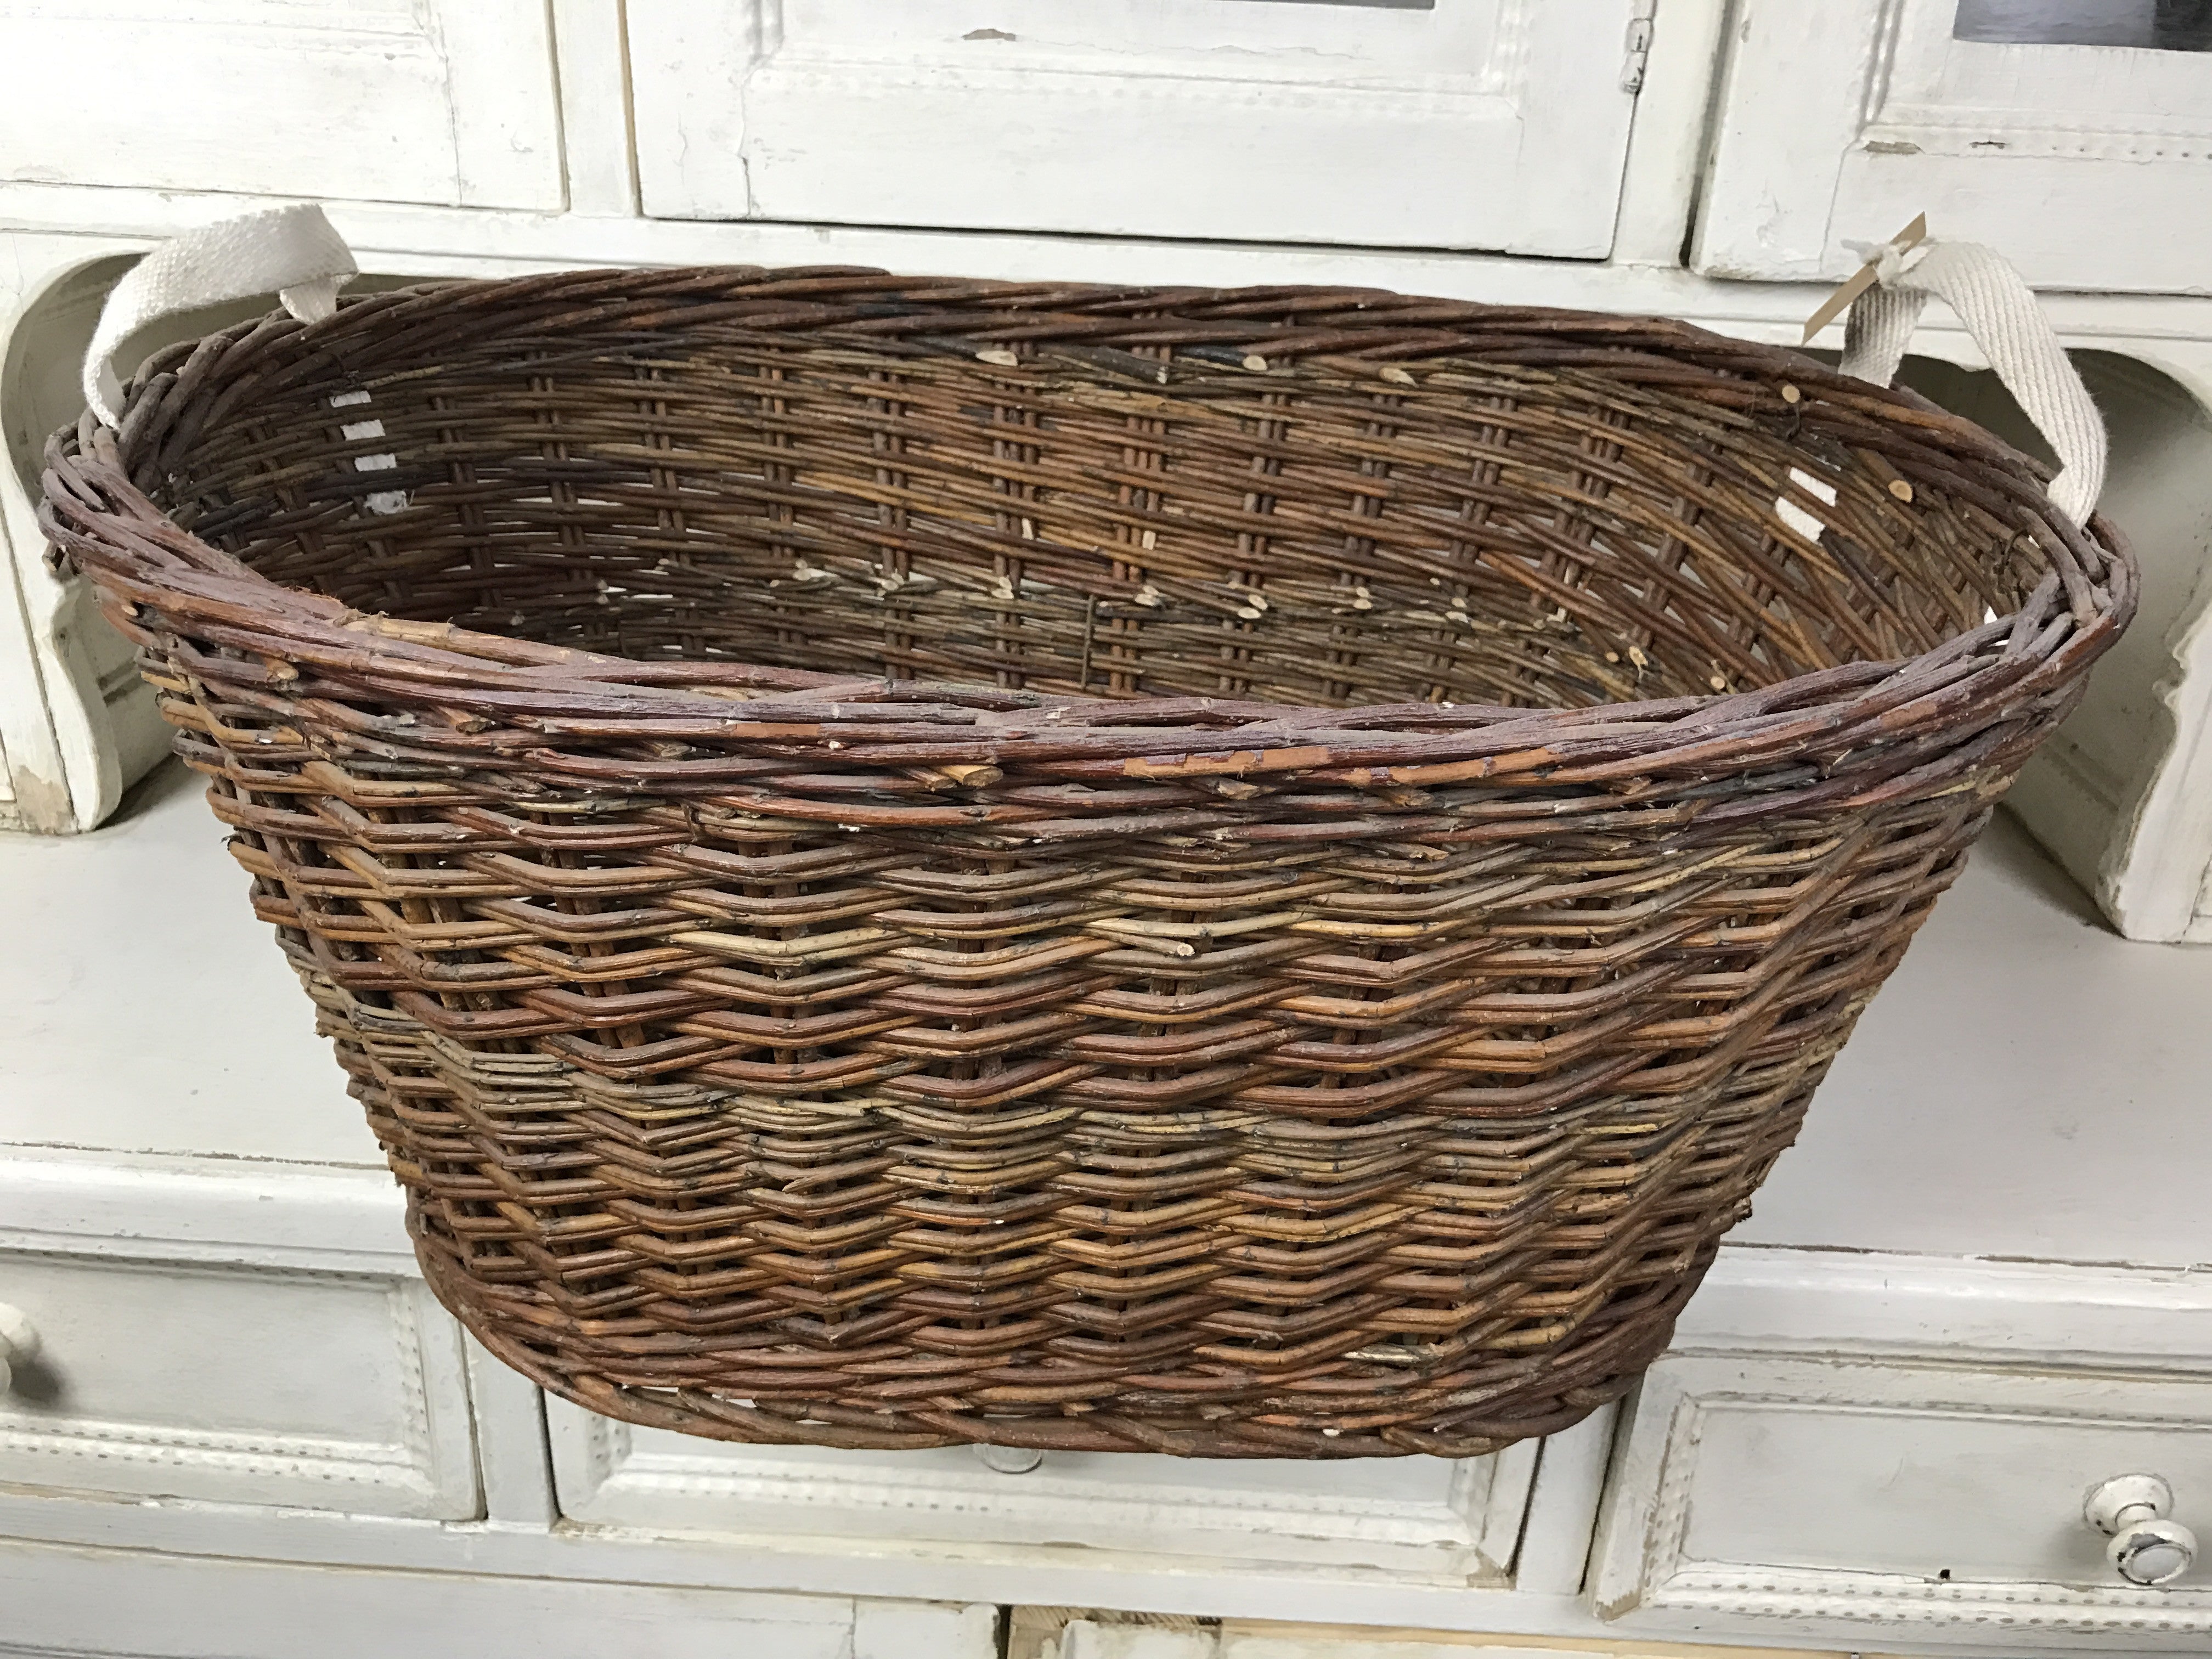 Vintage industrial French bakers baskets cane willow #1304 – Fossil